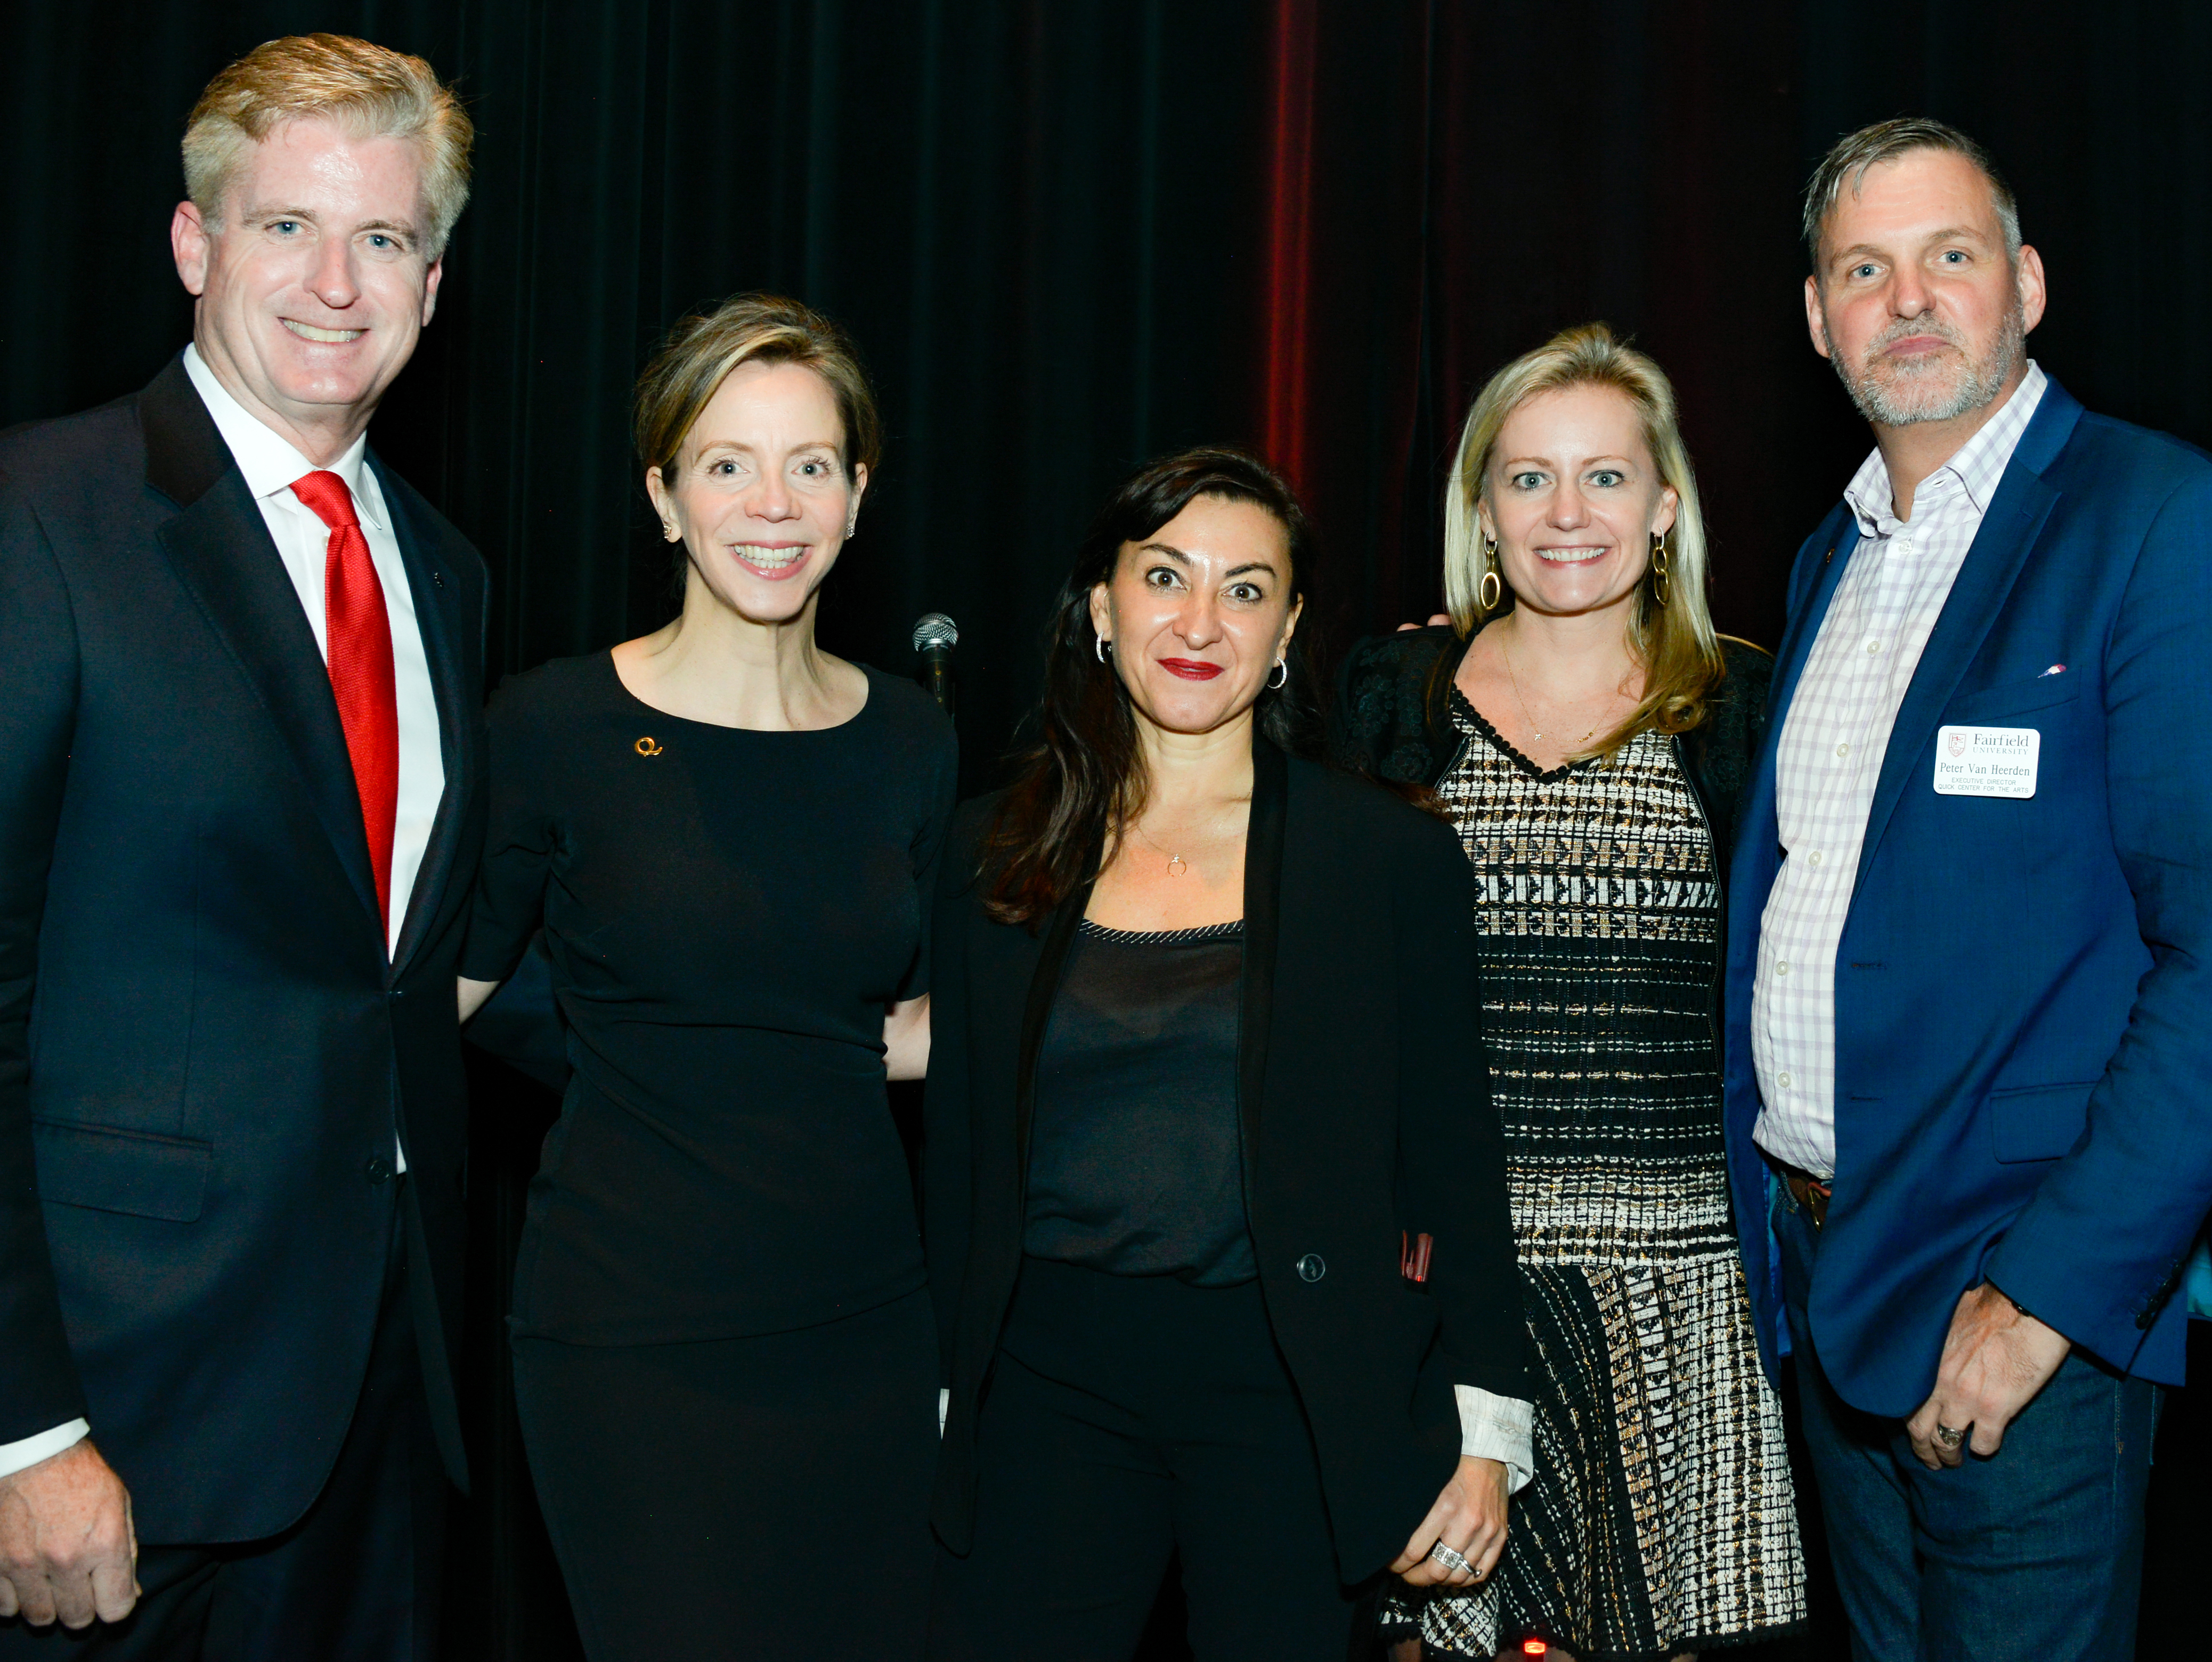 On stage at the Quick: Bill Tommins, Christine Siegel, Lynsey Addario, Emily Dreas, Peter VanHeerden